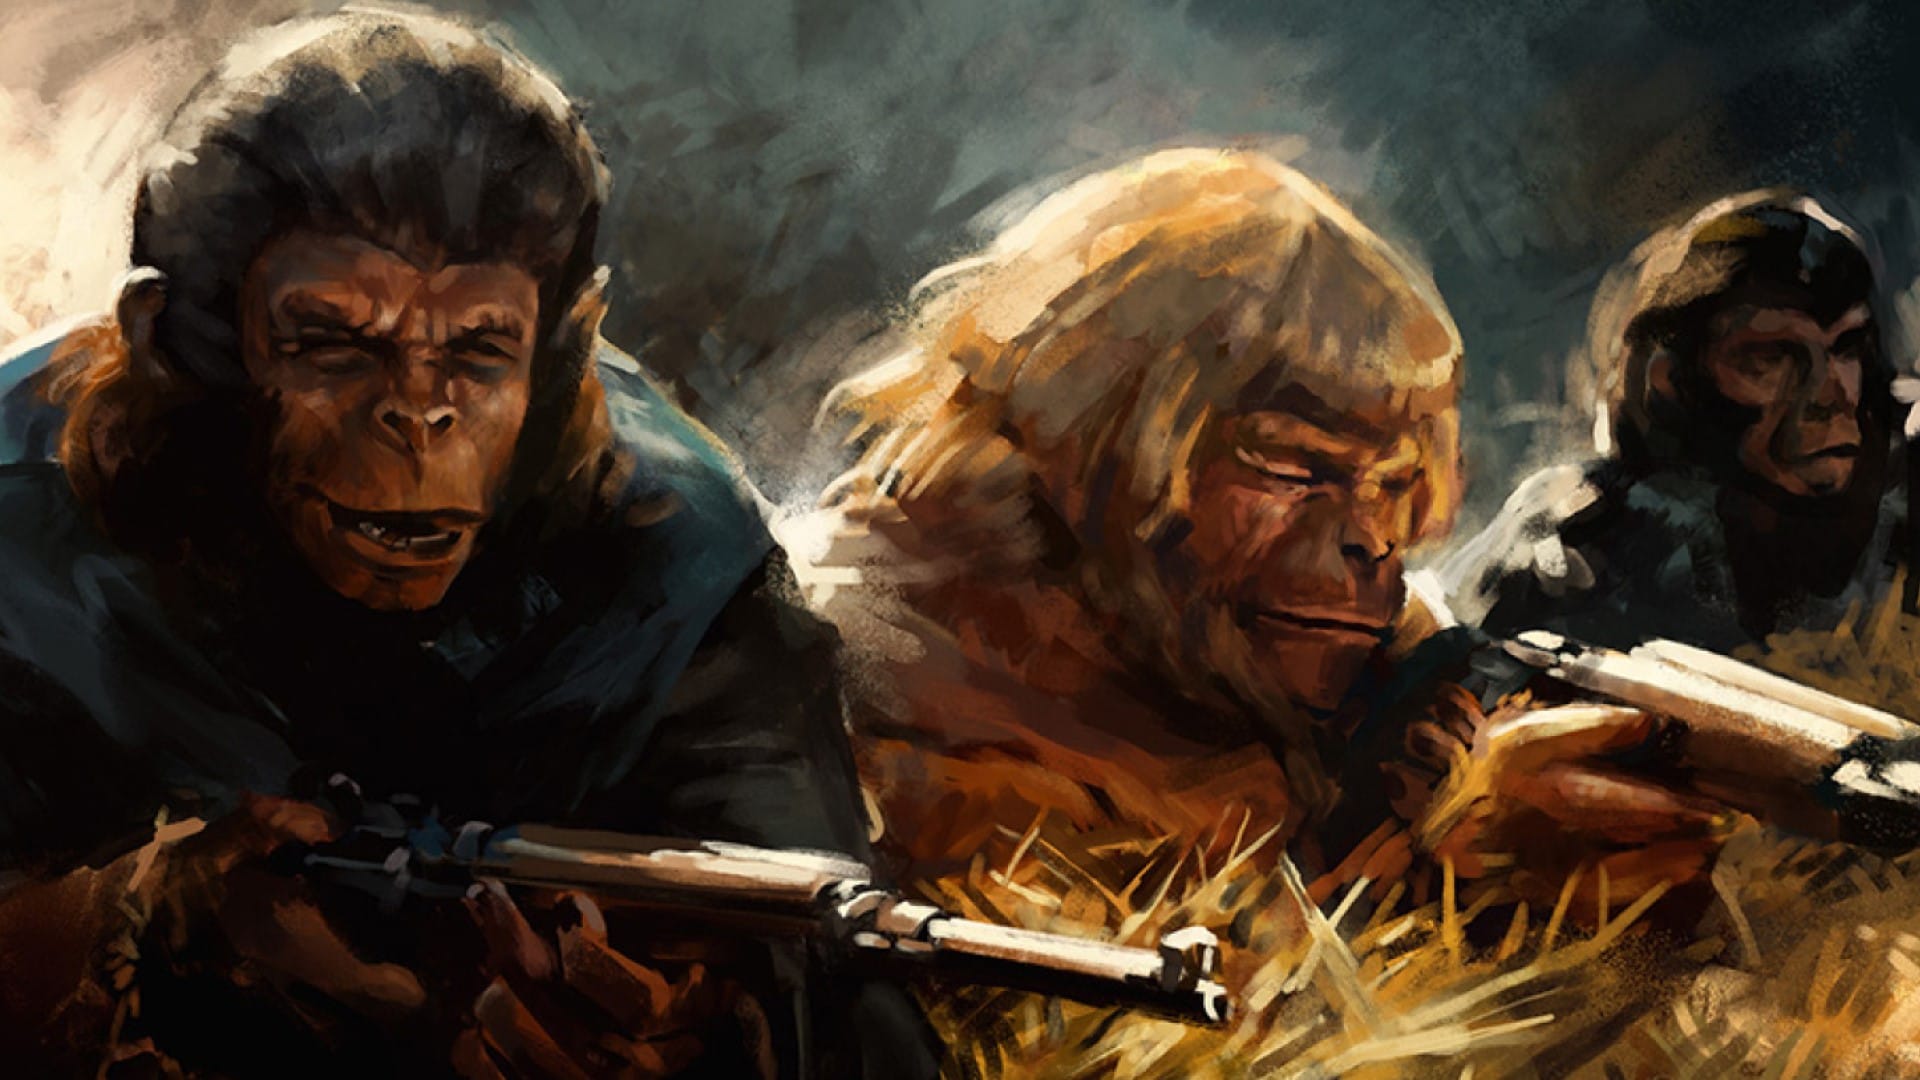 Promotional artwork of the Planet of the Apes TTRPG, showing ape characters armed with rifles.